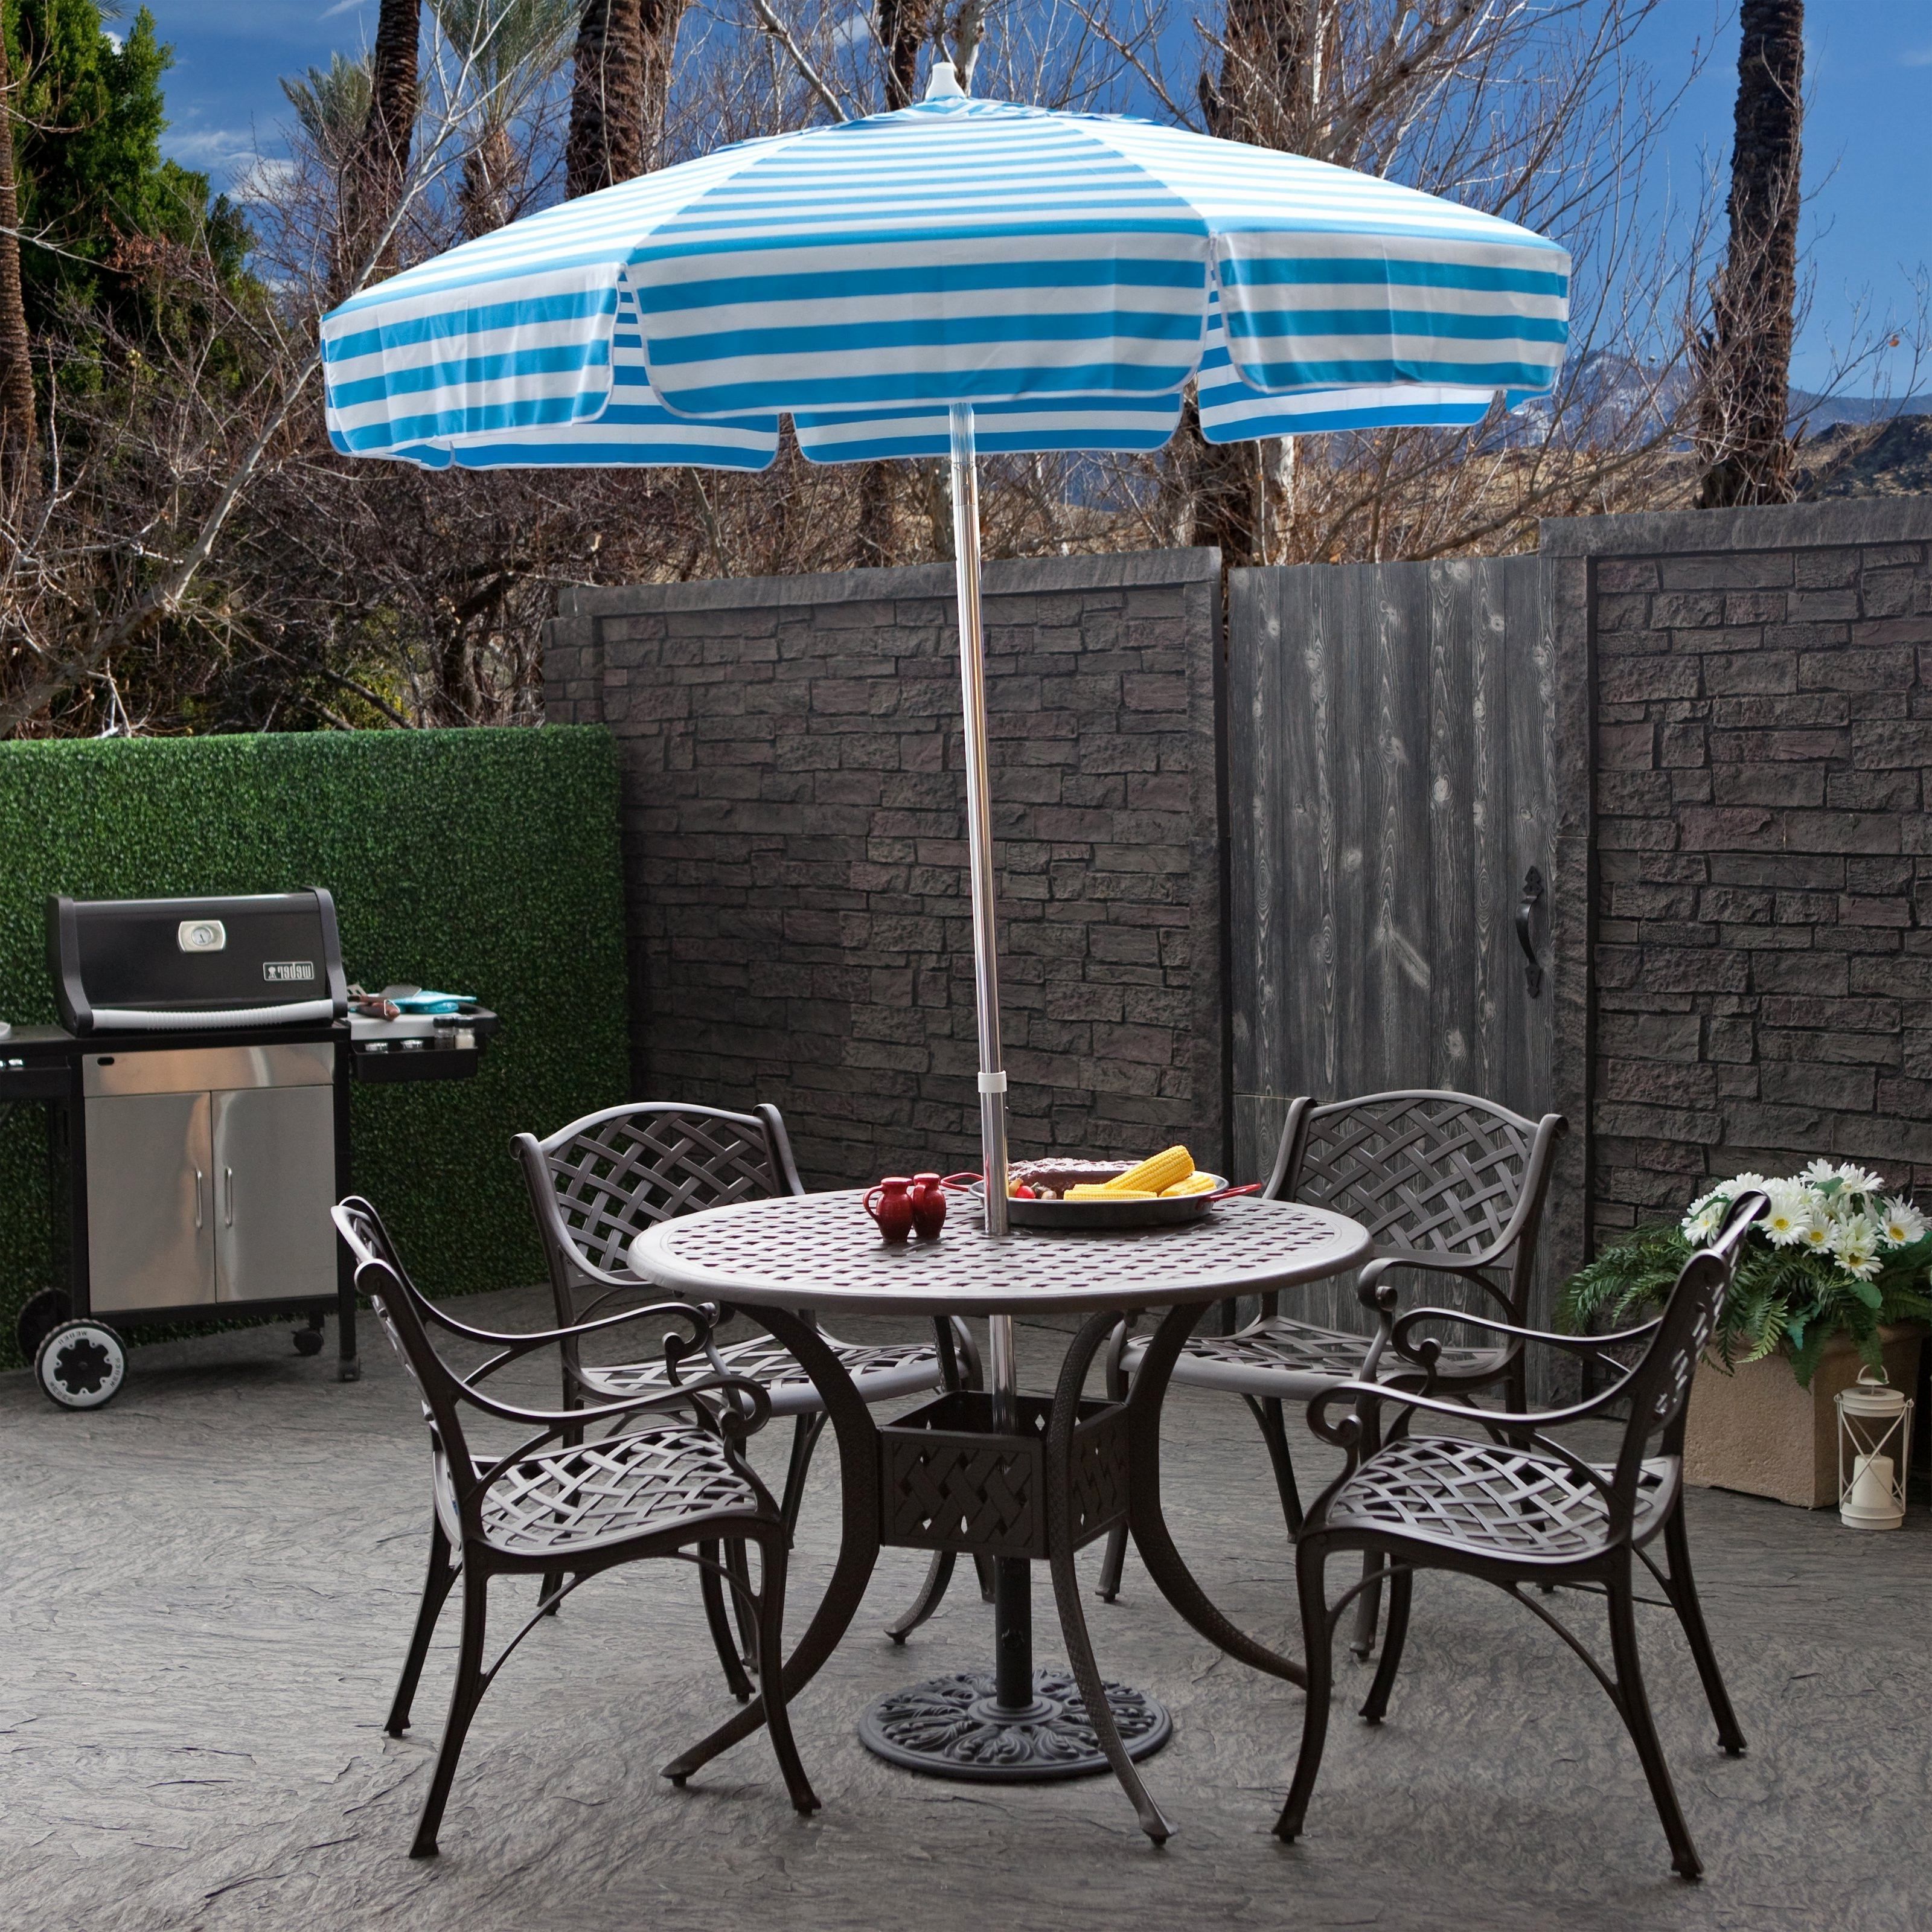 Patio Umbrellas With Table Within Most Recent Lowes Patio Umbrellas – Gorgeous Patio Umbrella Table Elegant Tall (View 10 of 20)